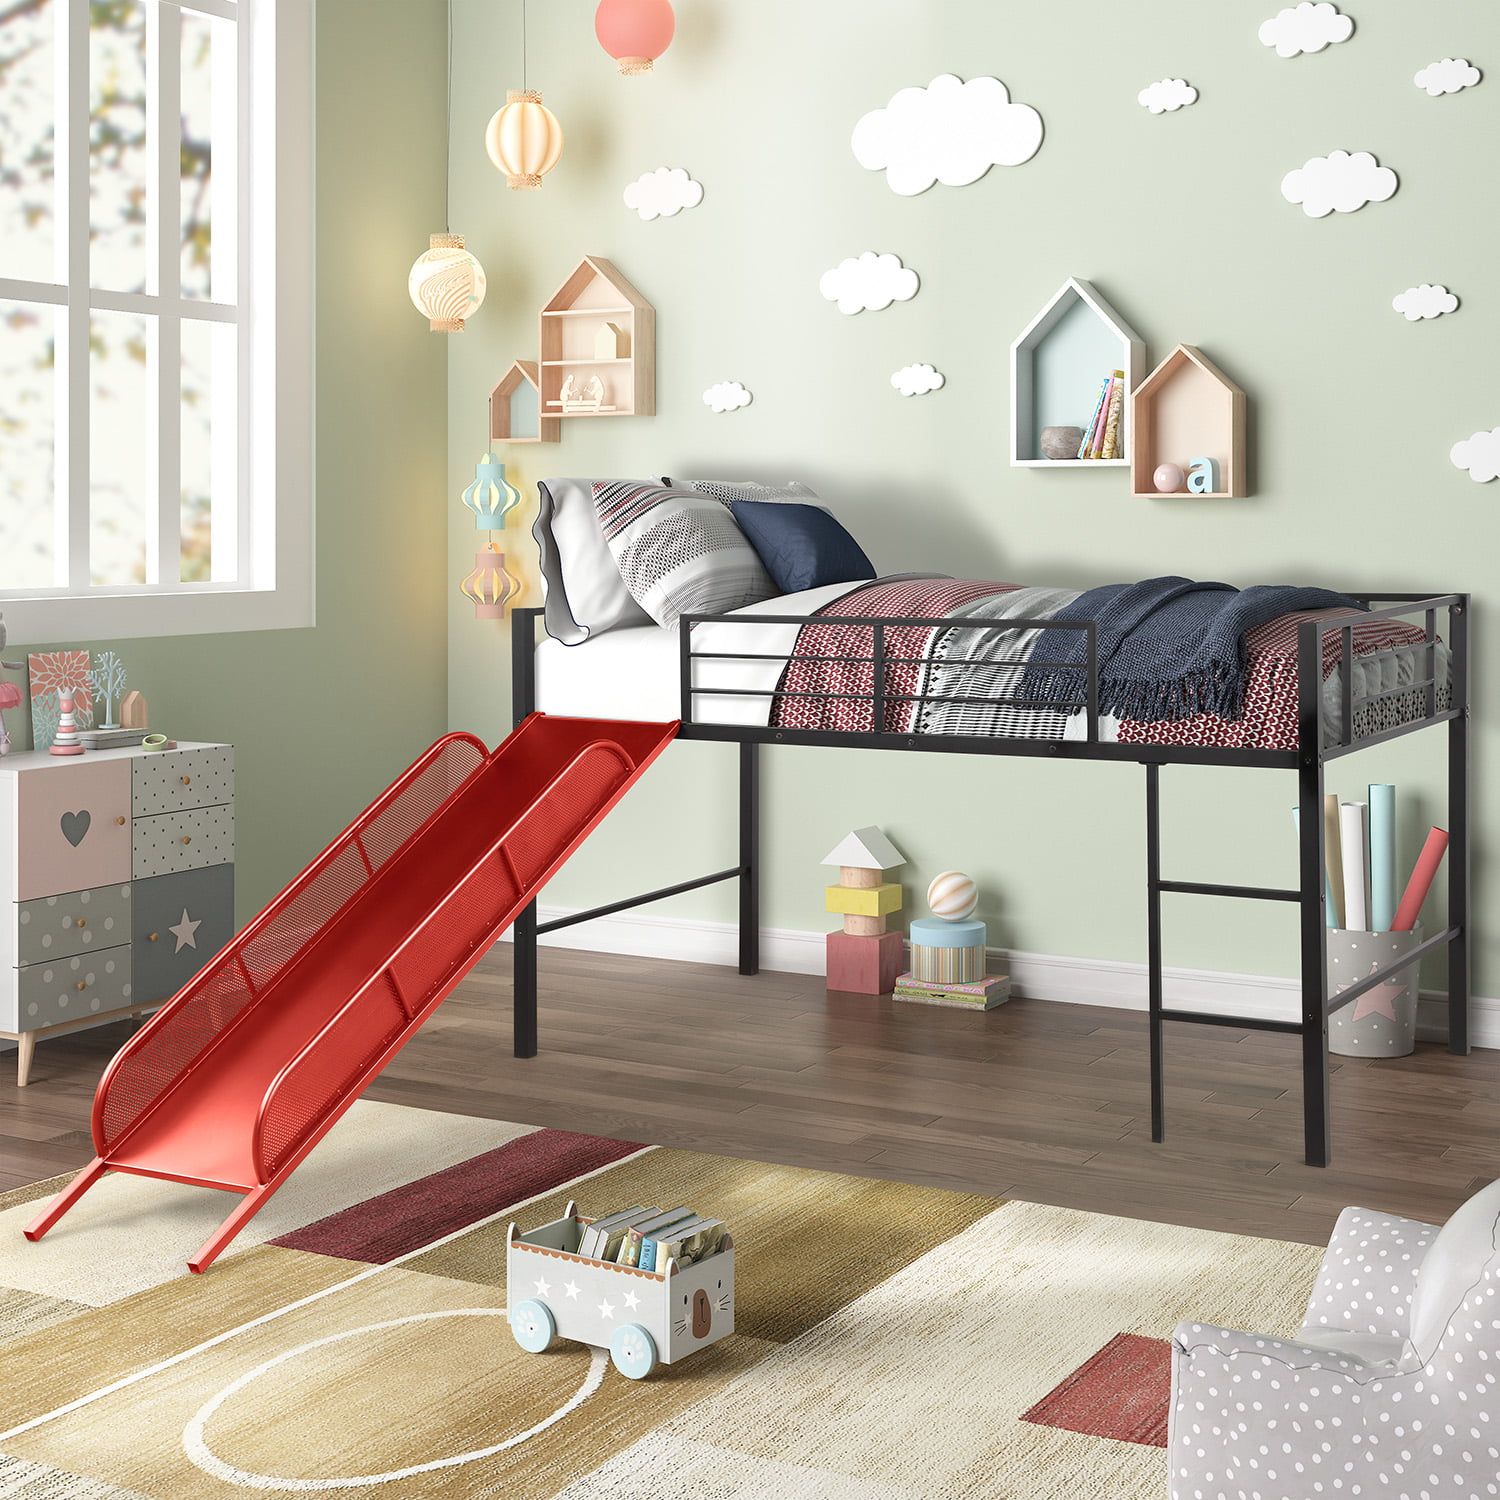 boy bunk beds with slide